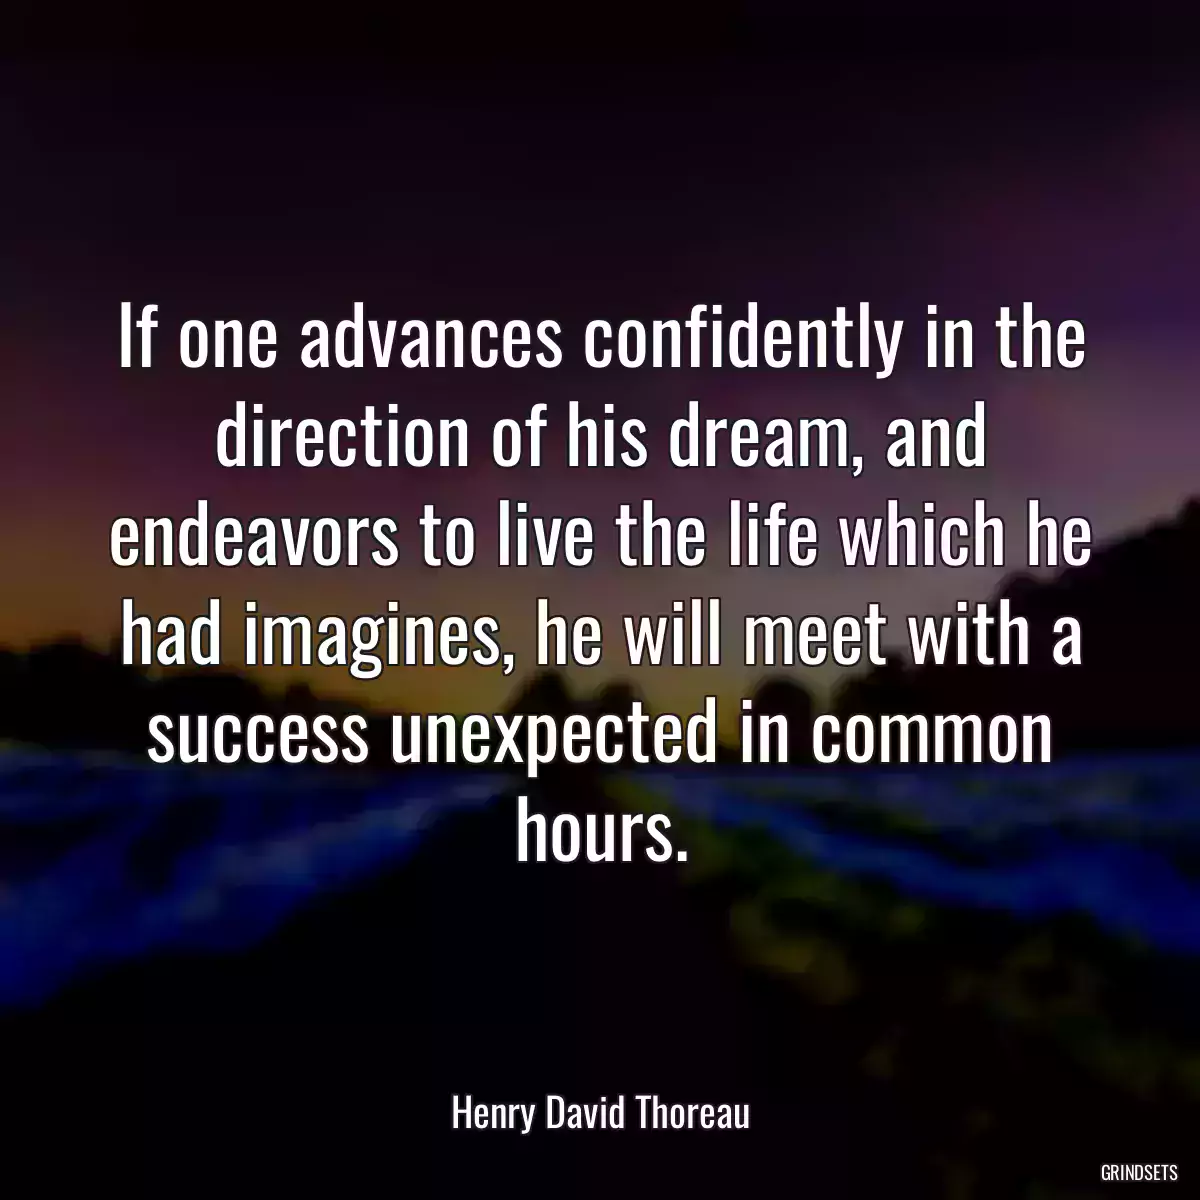 If one advances confidently in the direction of his dream, and endeavors to live the life which he had imagines, he will meet with a success unexpected in common hours.